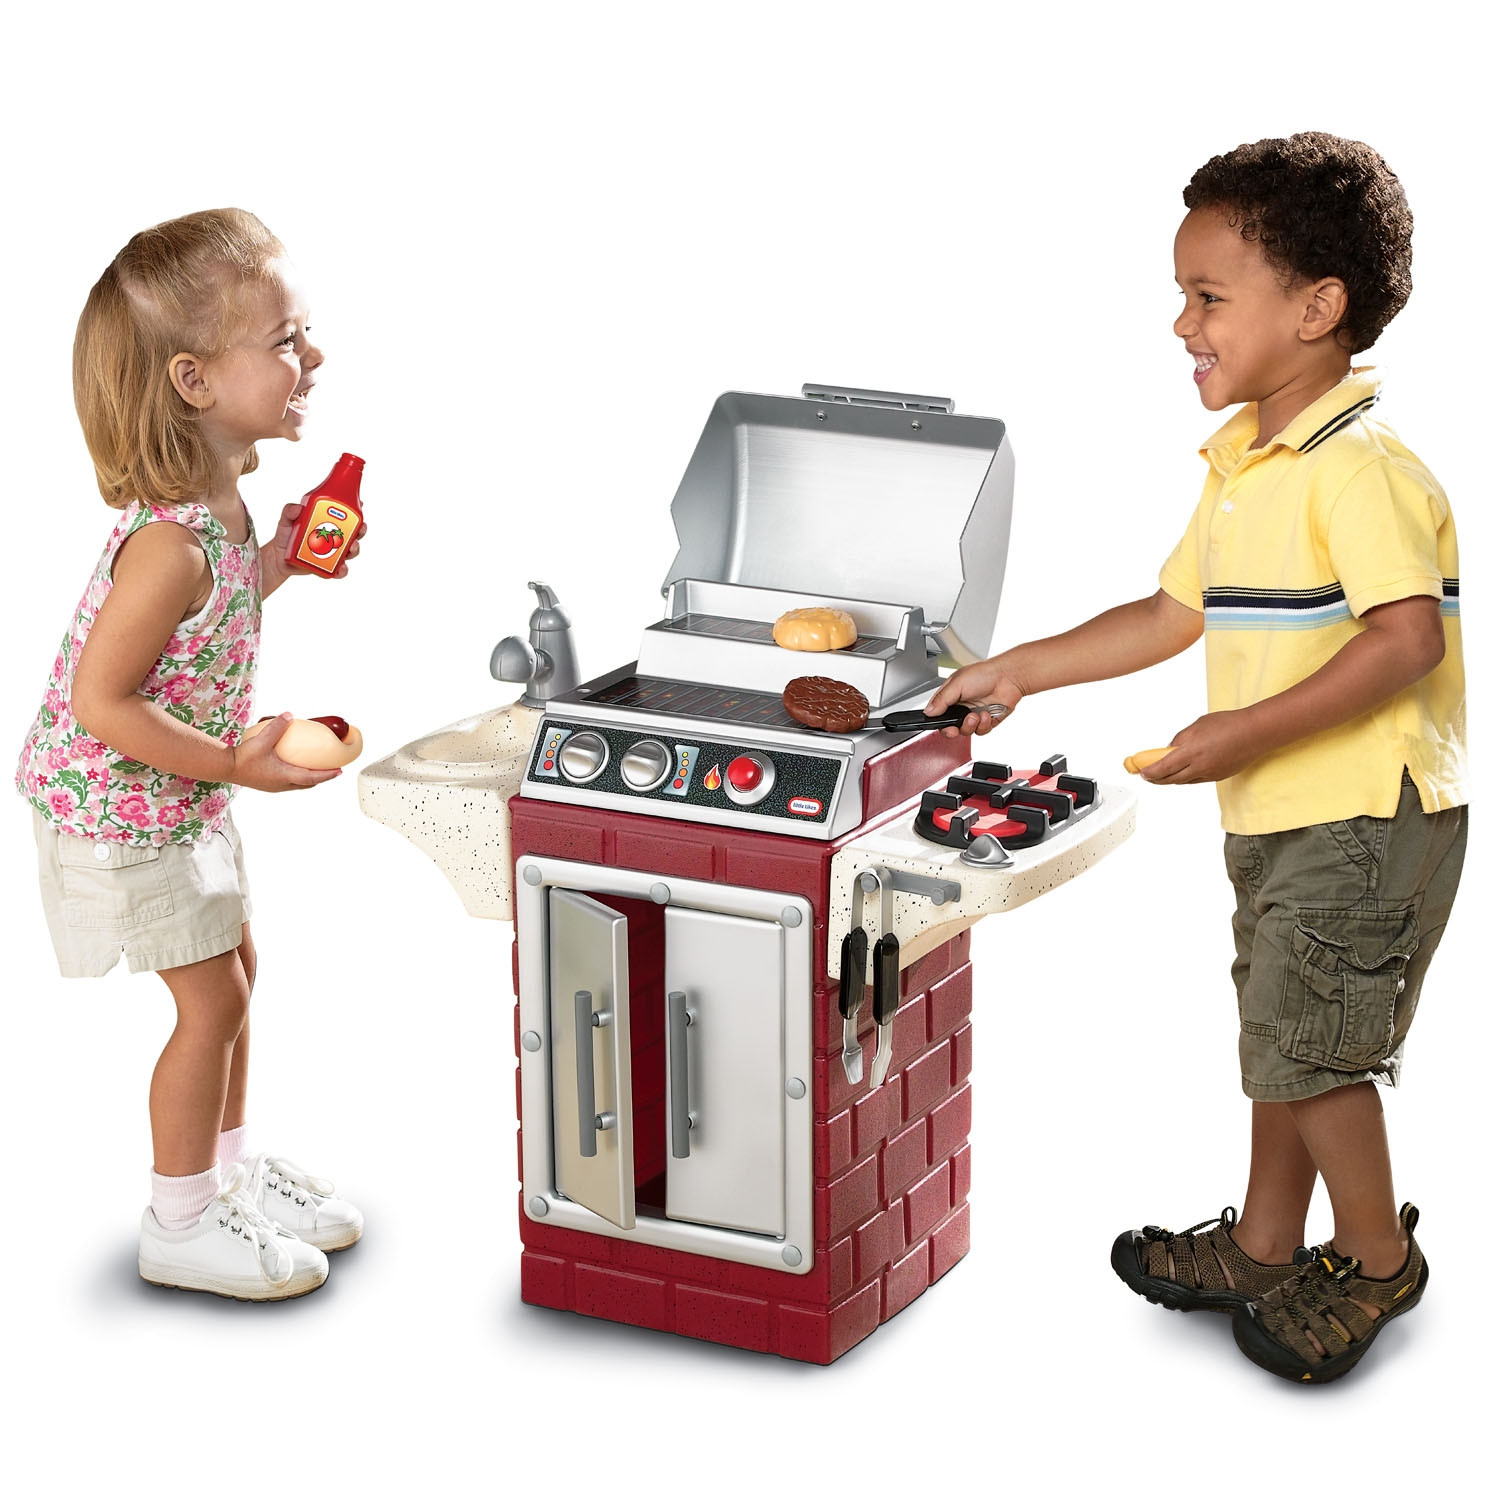 Little Tikes Backyard Barbeque
 Backyard Barbecue Get Out n Grill